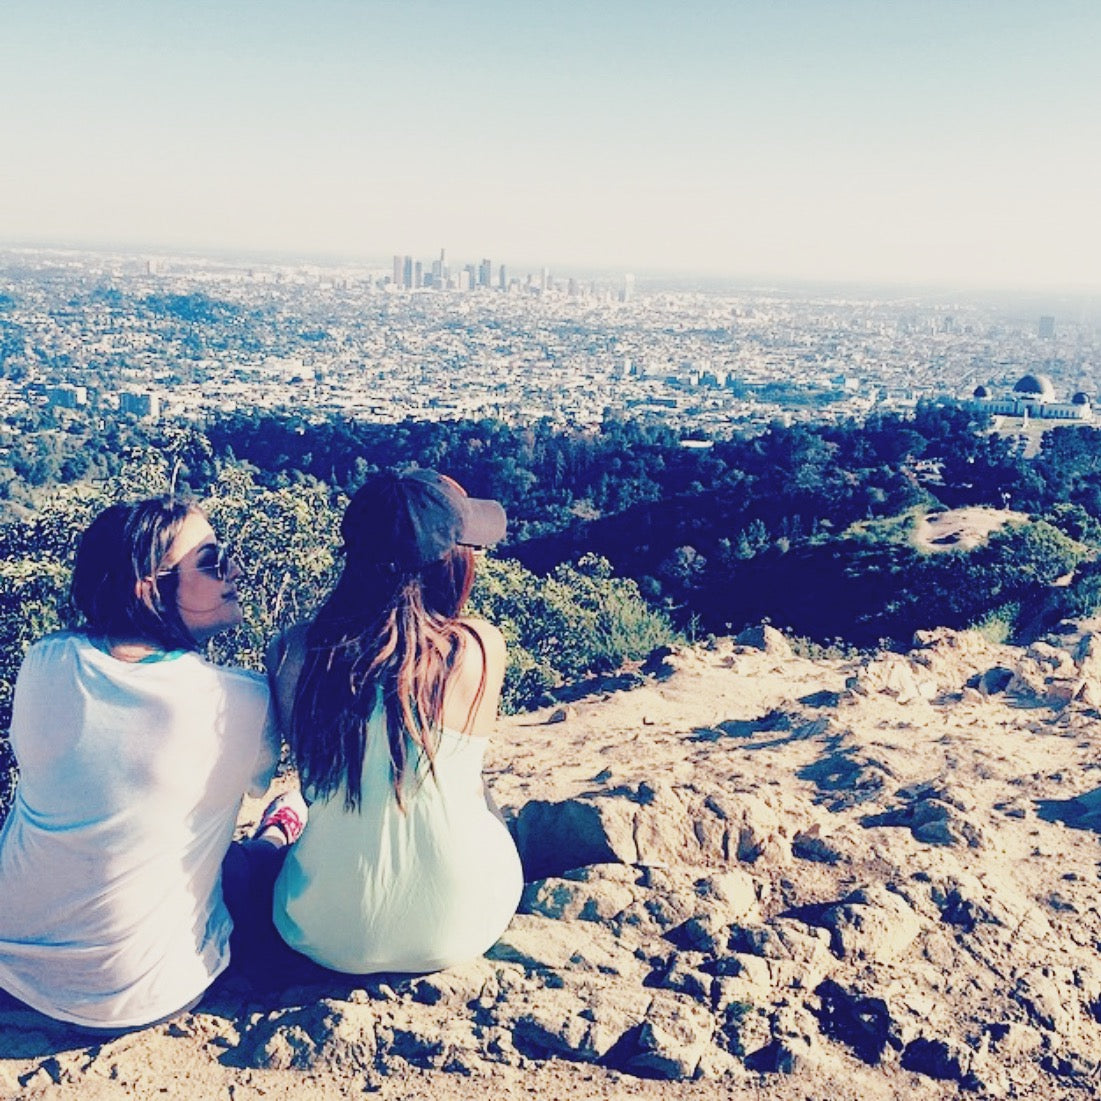 Our List of Favorite Hikes in LA